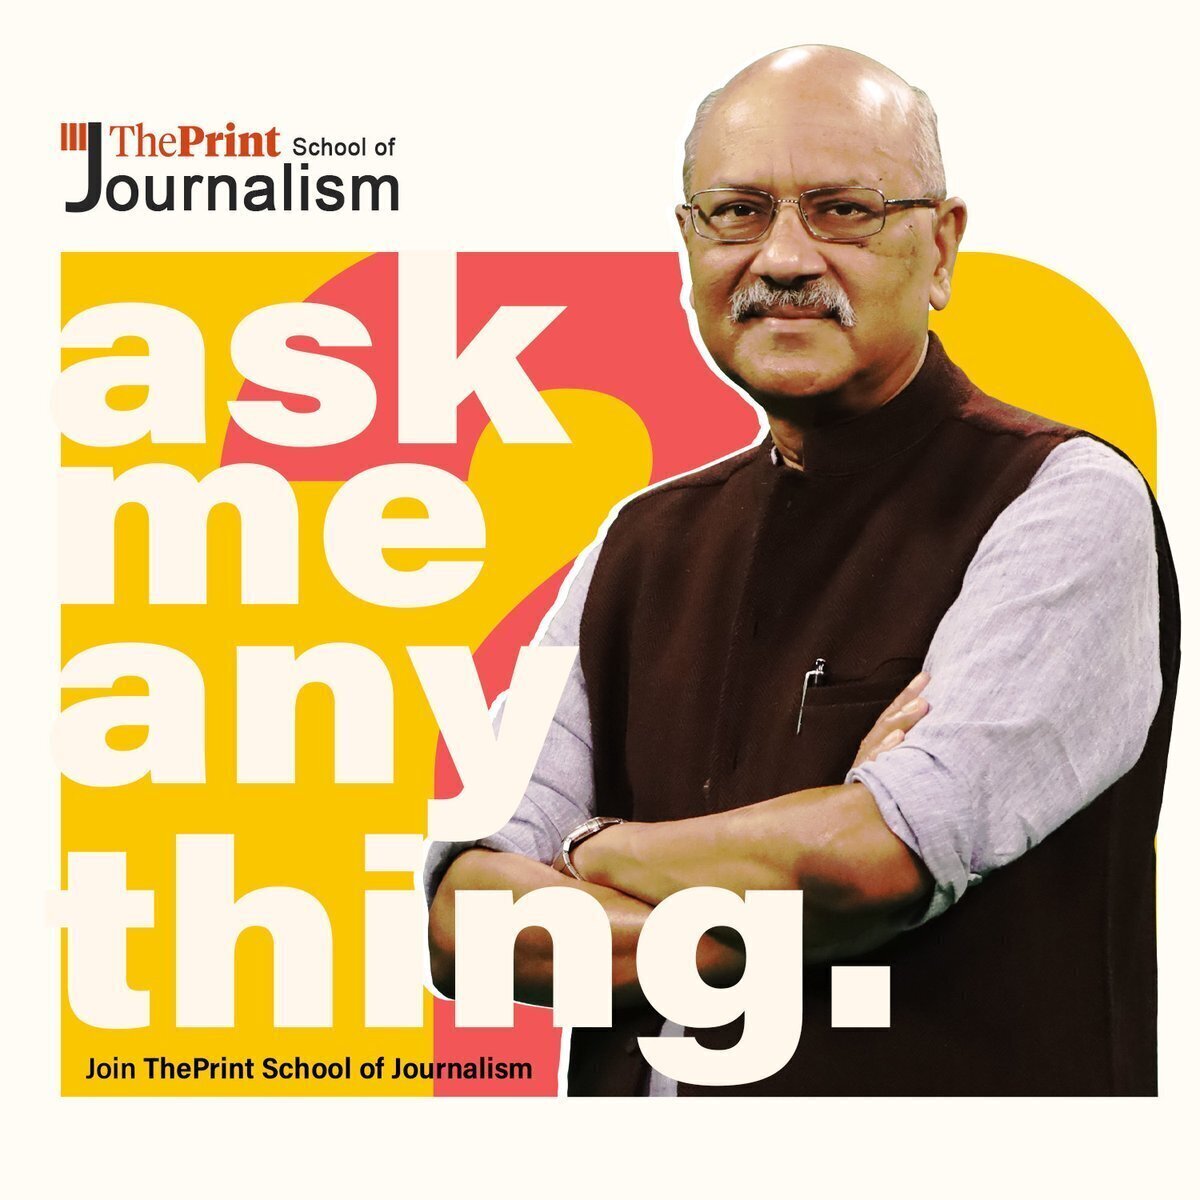 It is not everyday that you get to ask ThePrint's Founder-Editor anything pertaining to journalism. Join ThePrint School of Journalism today to learn the 101 of journalism from the best. Limited time left to apply.

Sign up now: school.theprint.in/apply.php